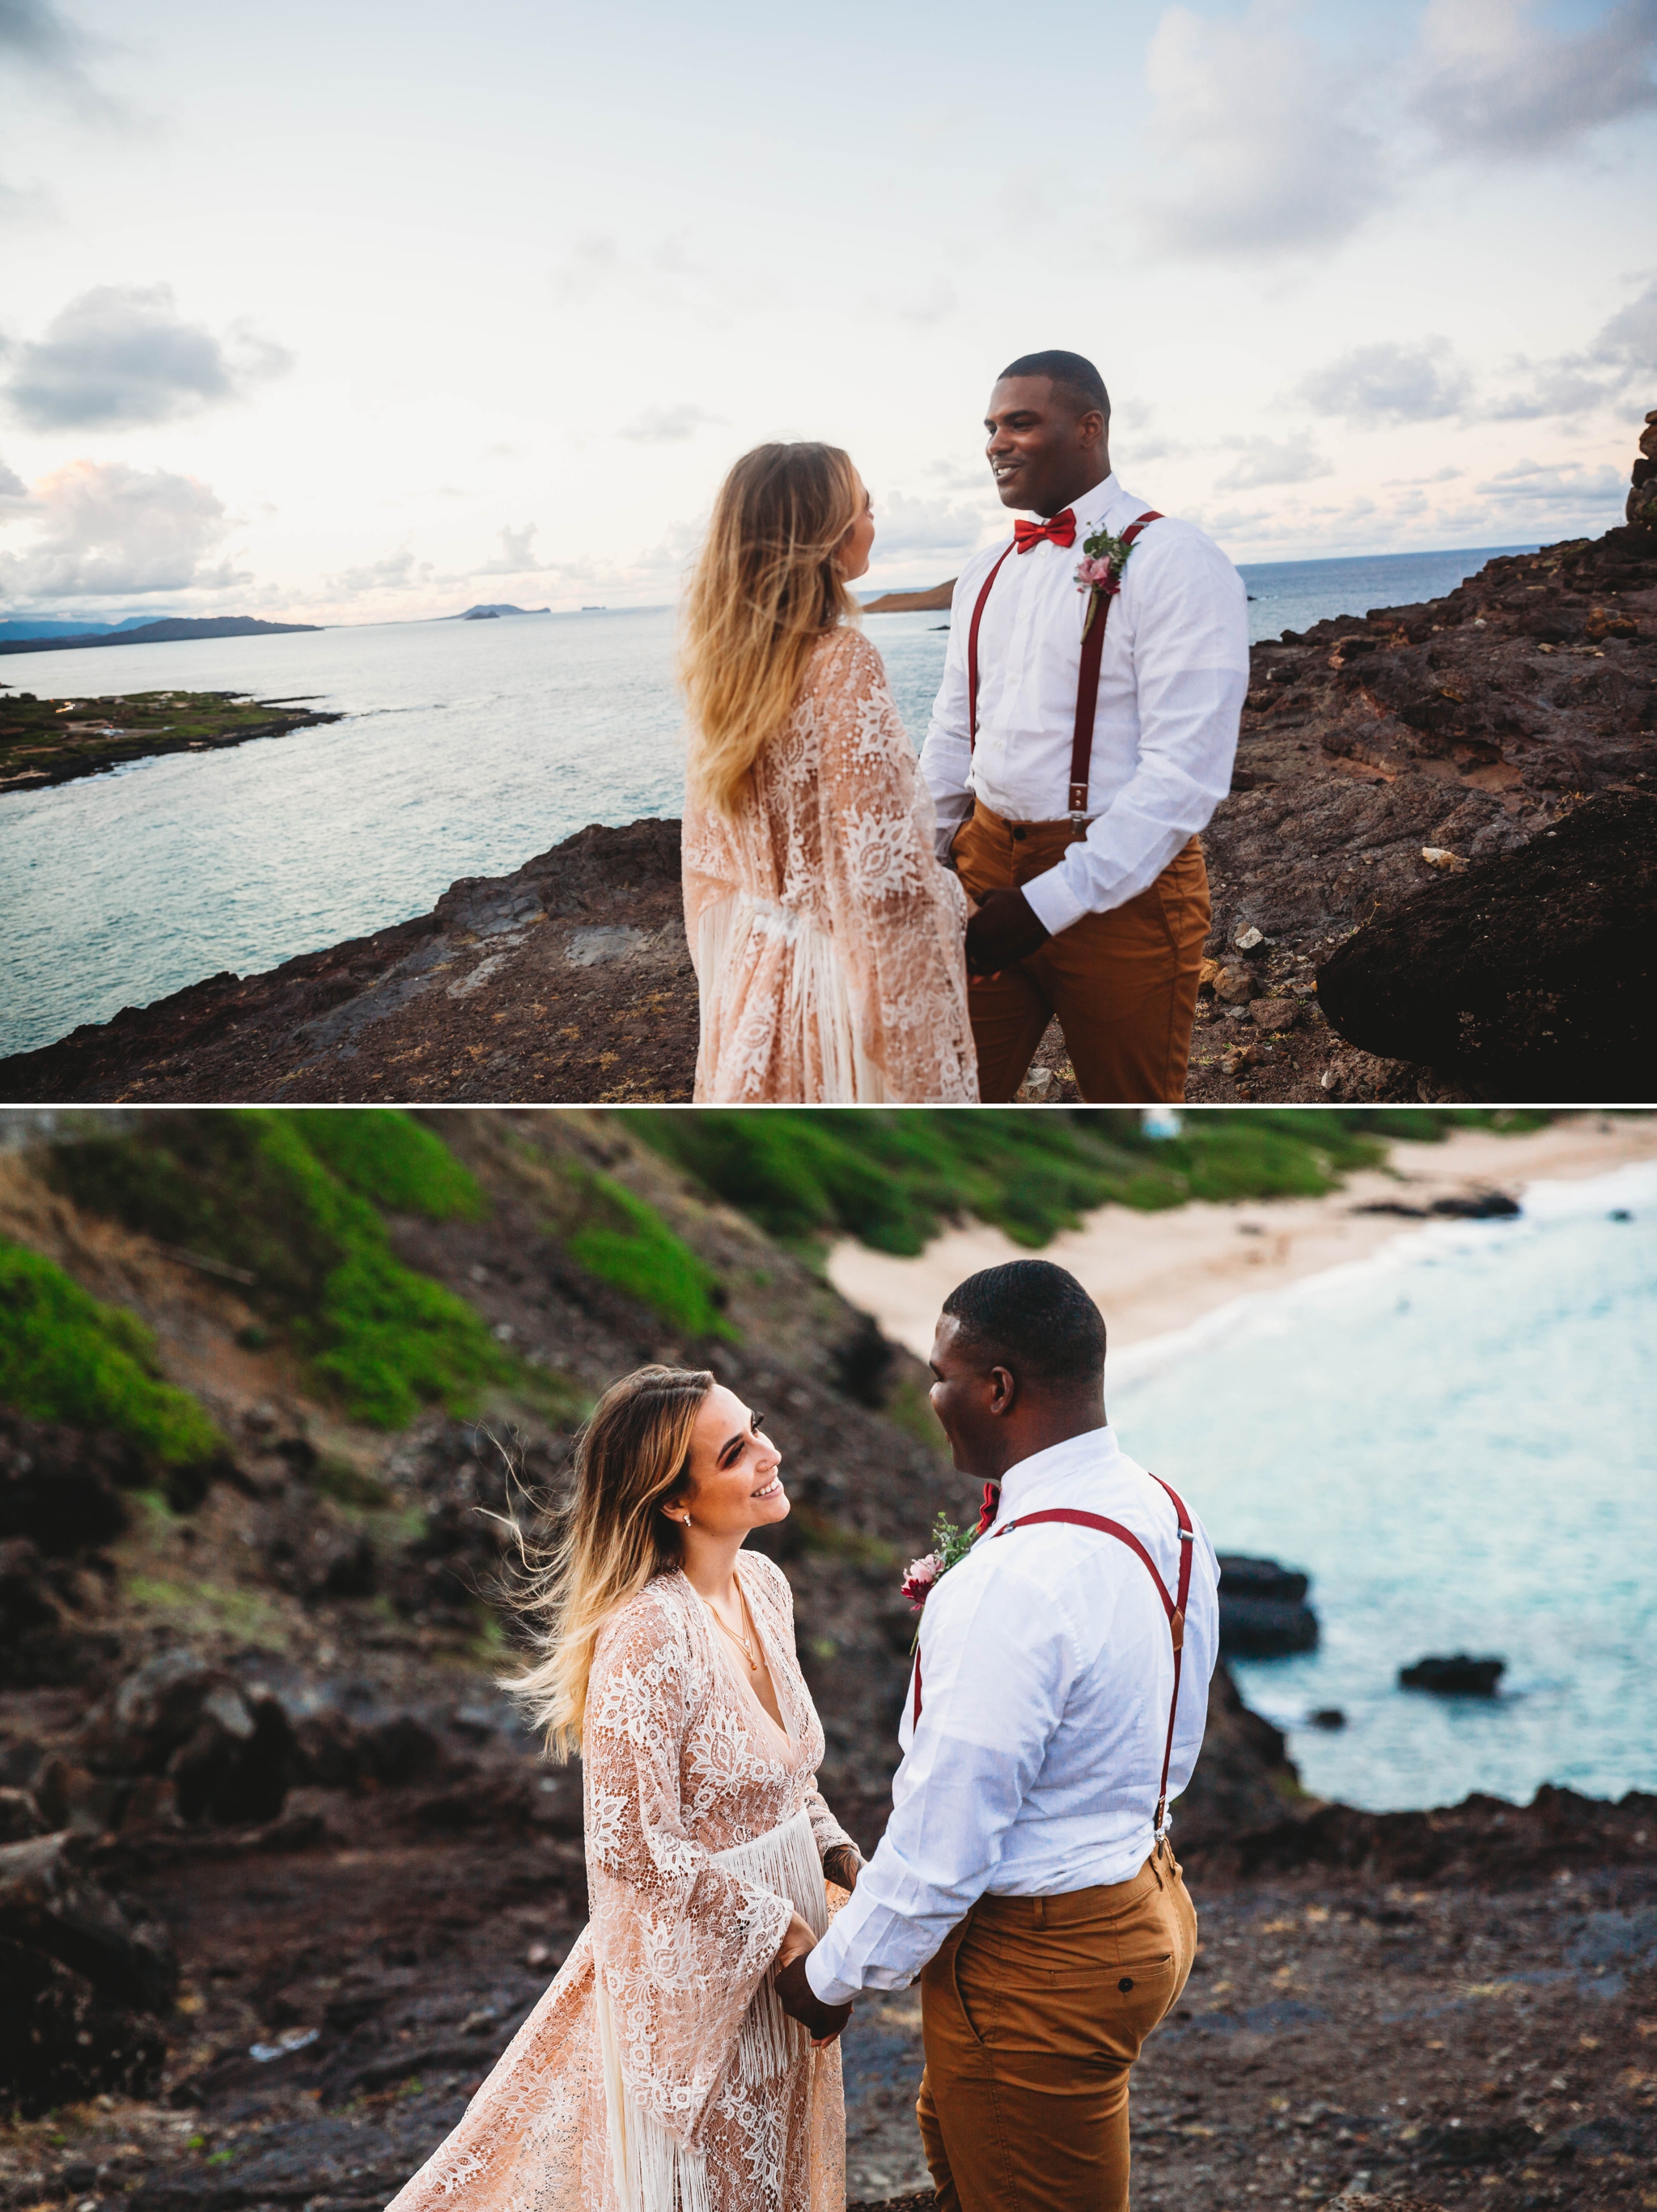  couple looking at each other during the vows - wedding ceremony at Makapuu Lookout overlooking the ocean and beach, Waimanalo, HI - Oahu Hawaii Engagement Photographer - Bride in a flowy fringe boho wedding dress - lanikai lookout - deutsche hochzei